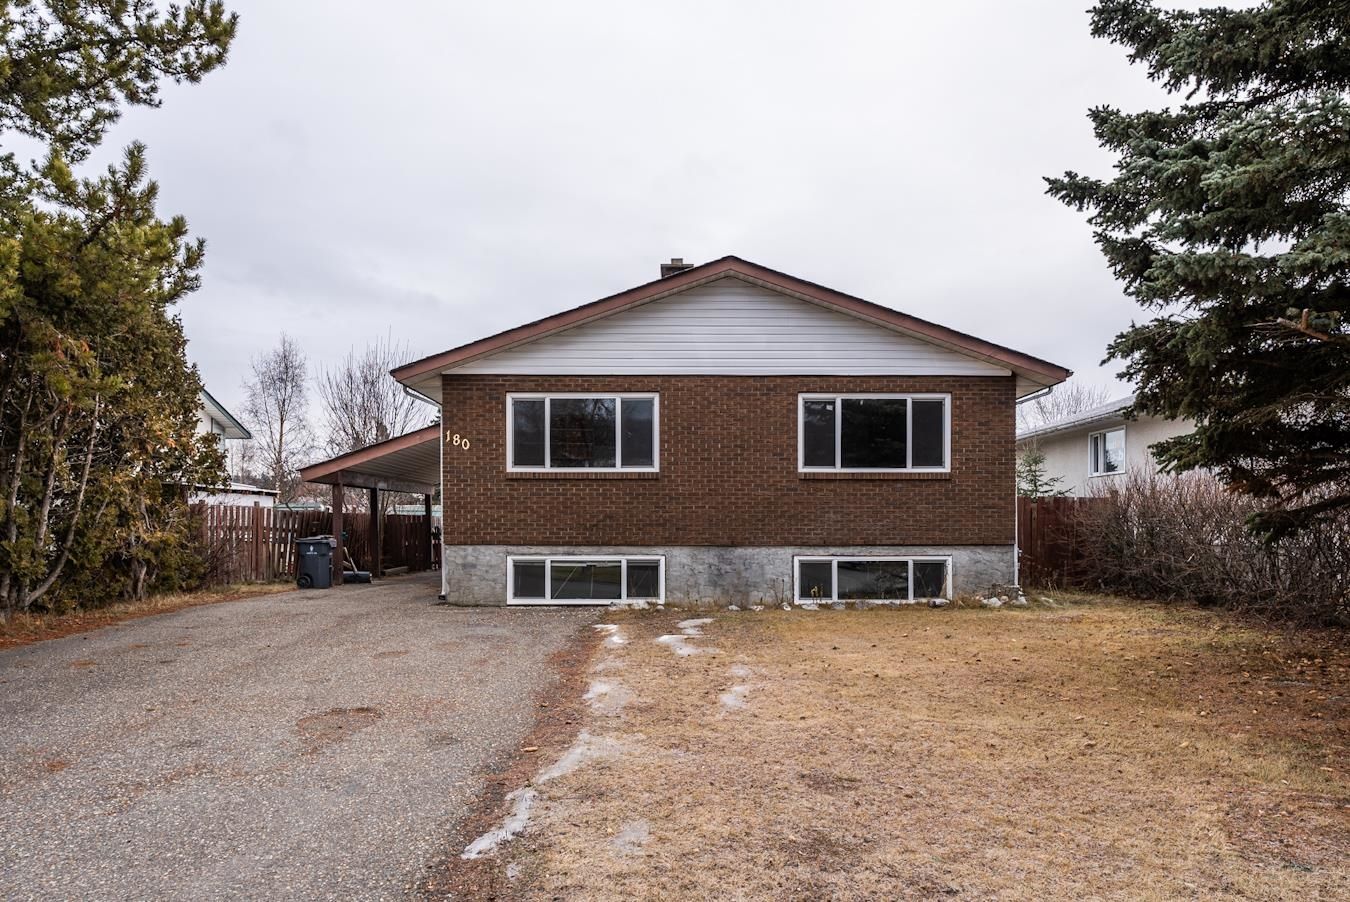 New property listed in Heritage, PG City West